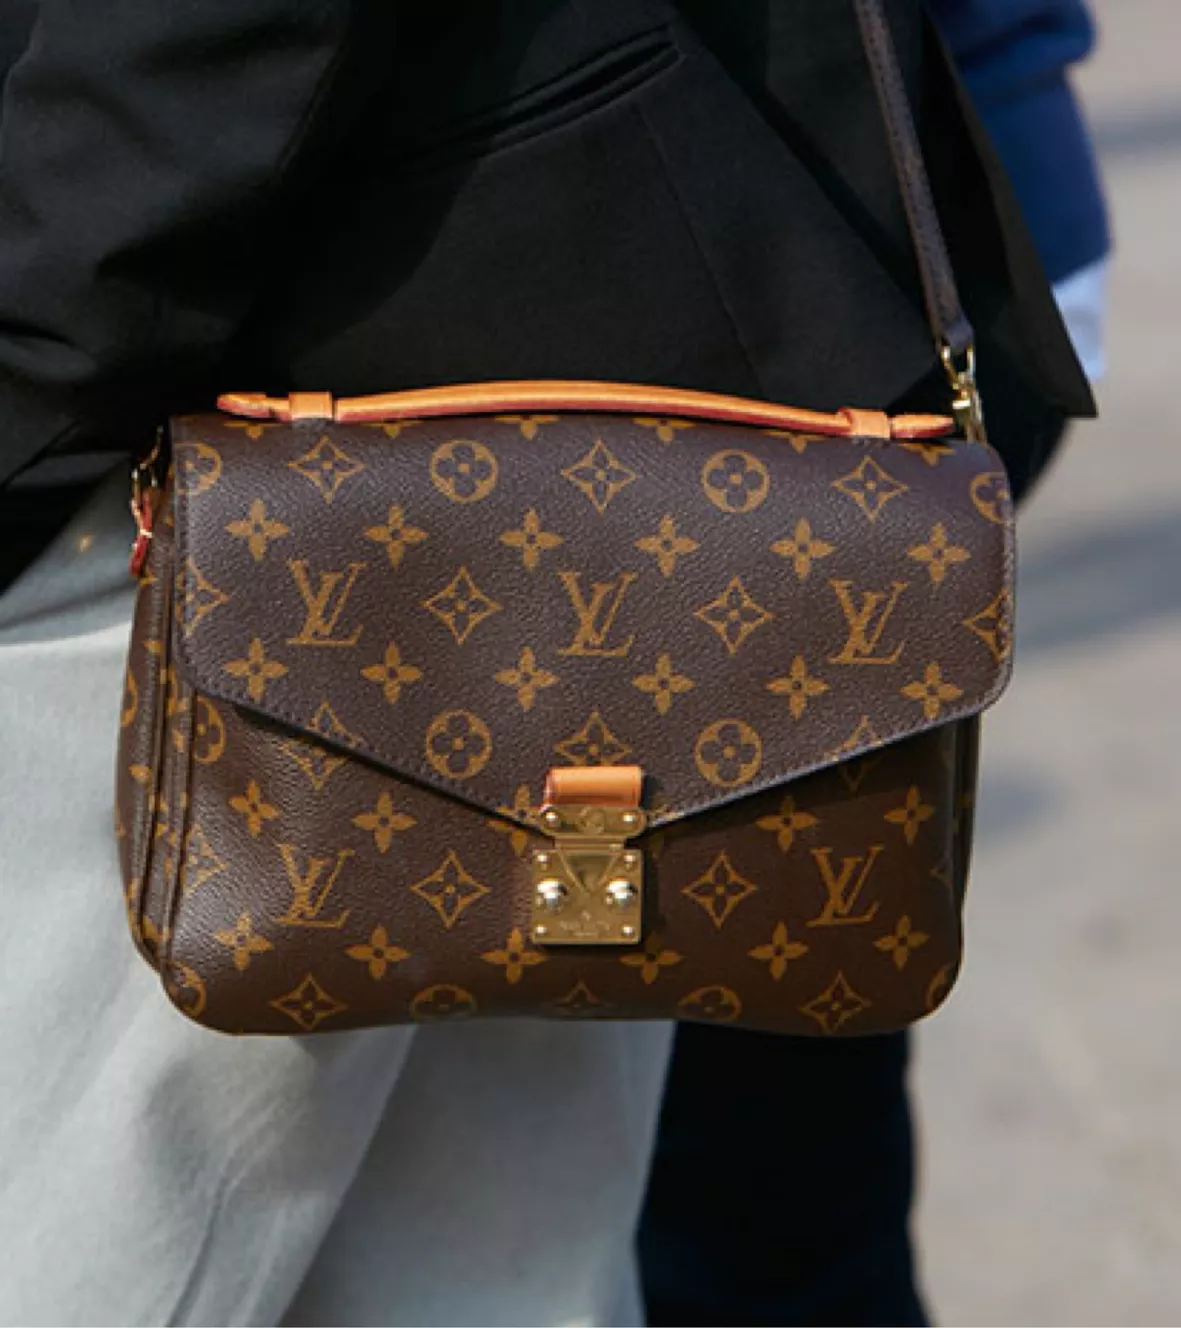 Louis Vuitton on X: Featuring the #LouisVuitton initials, the